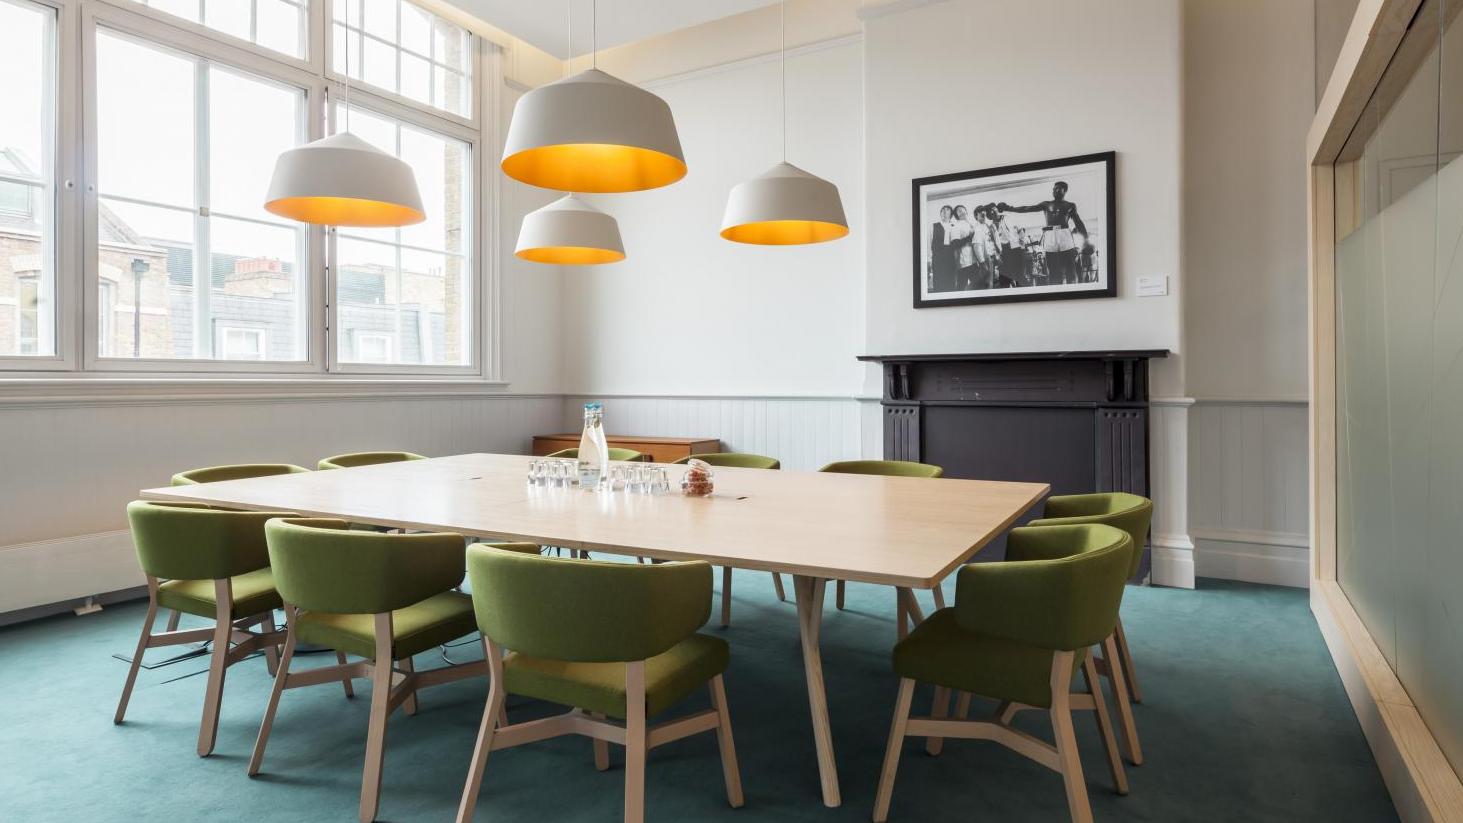 Find your Meeting Room in St Pancras, London